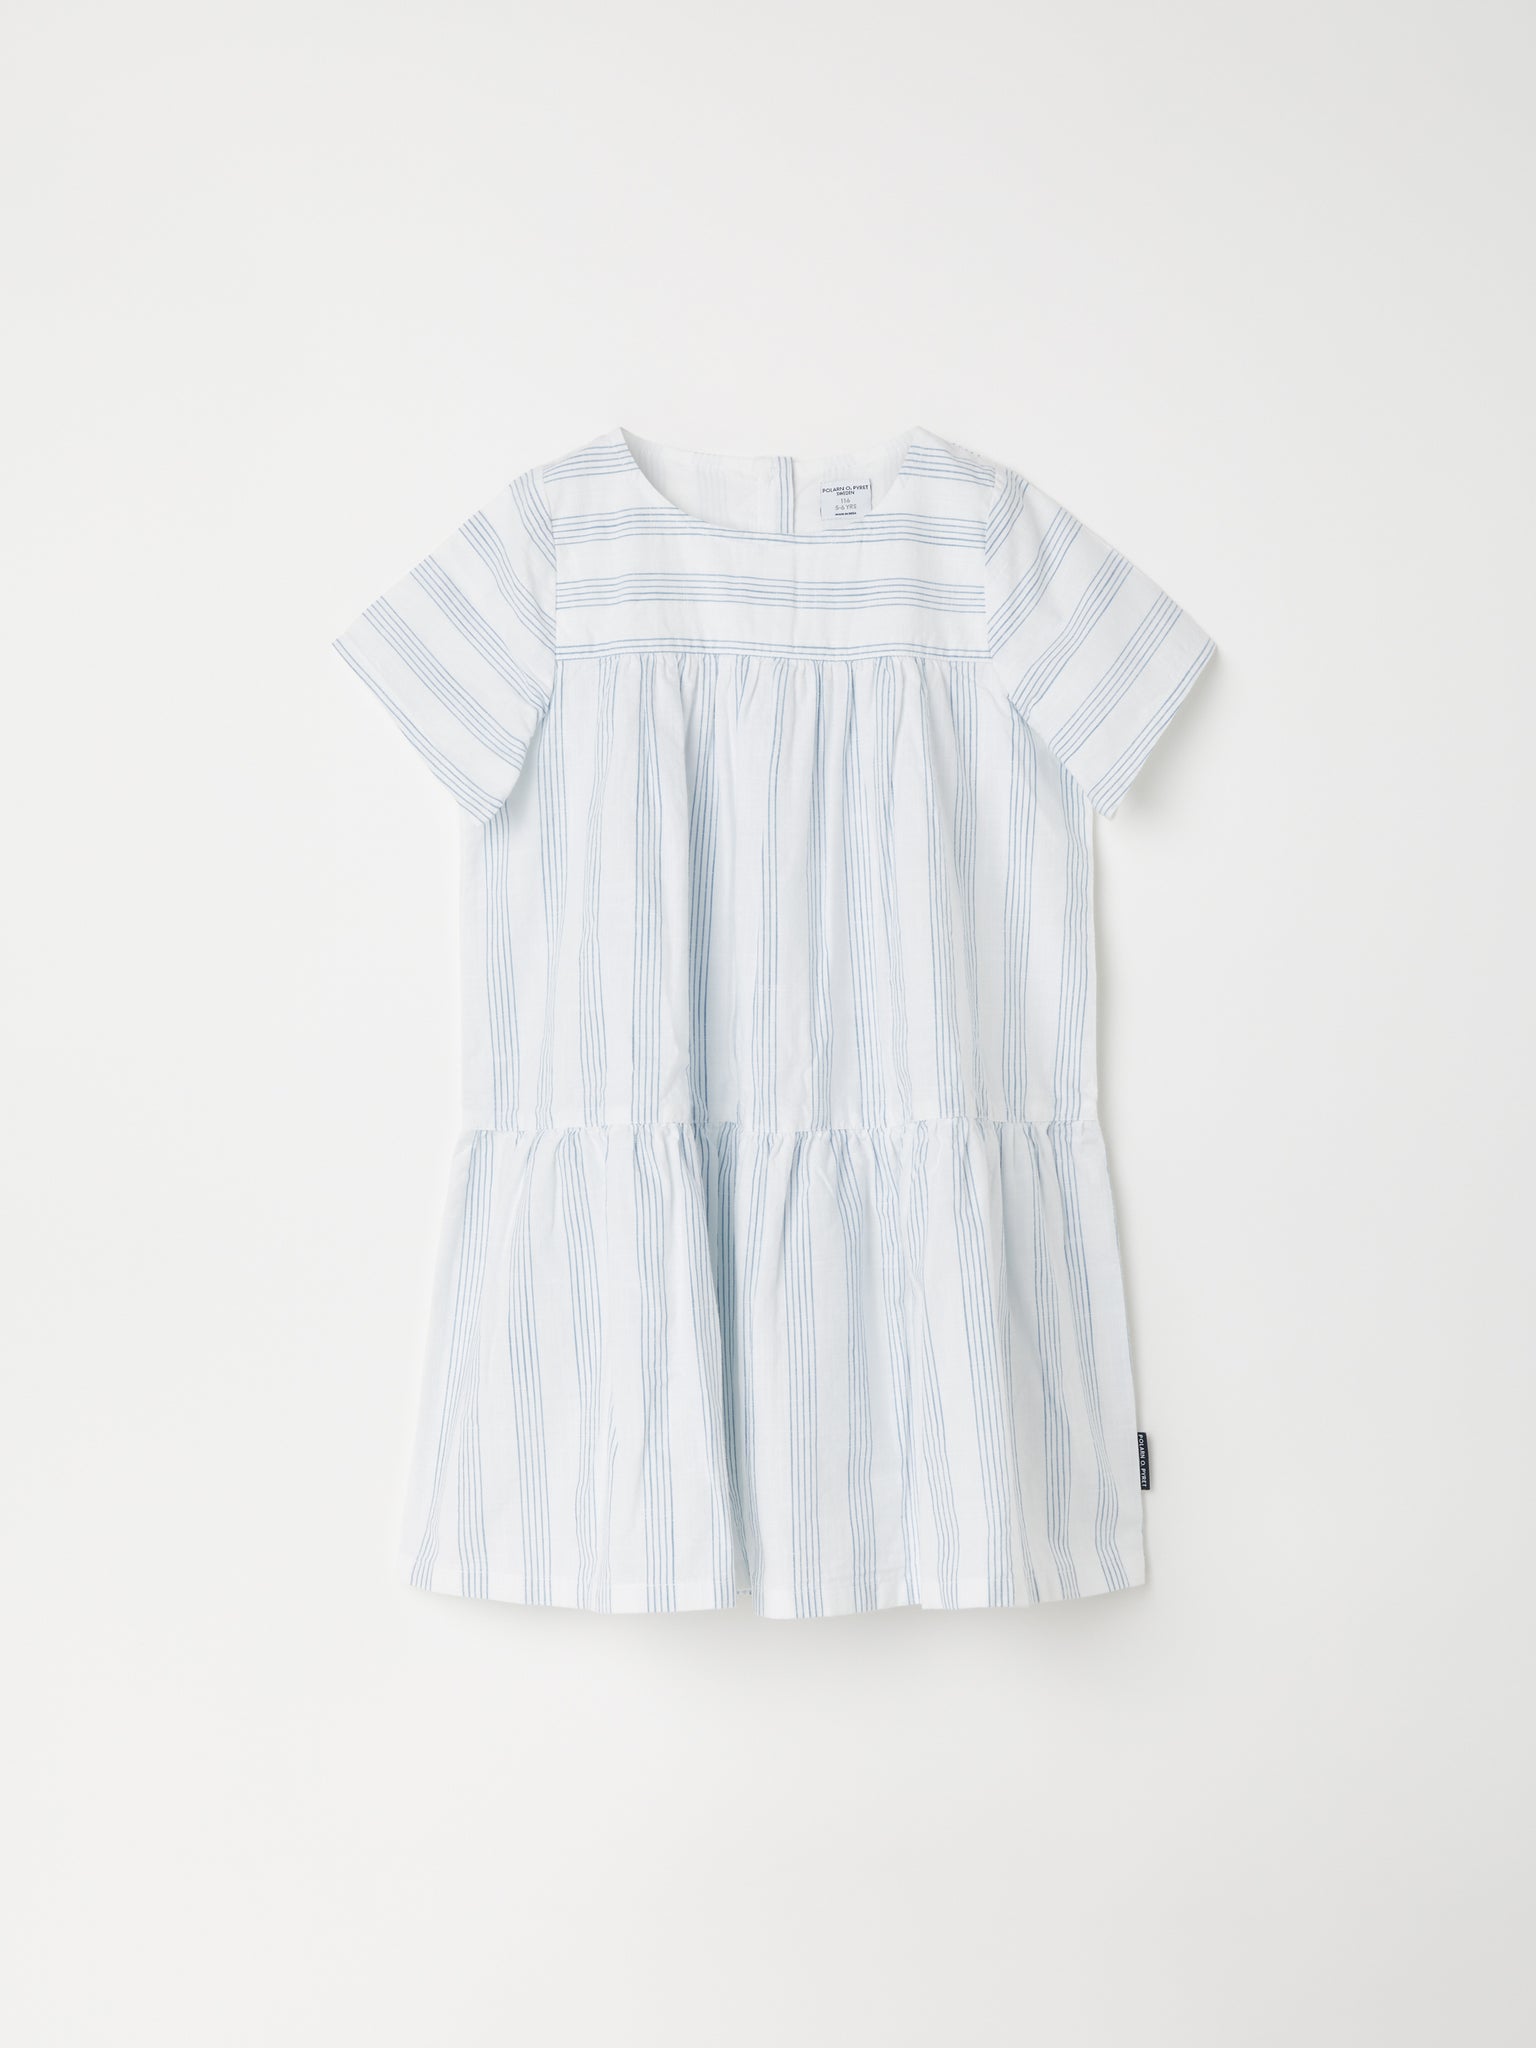 Blue Striped Woven Kids Dress from the Polarn O. Pyret kidswear collection. The best ethical kids clothes